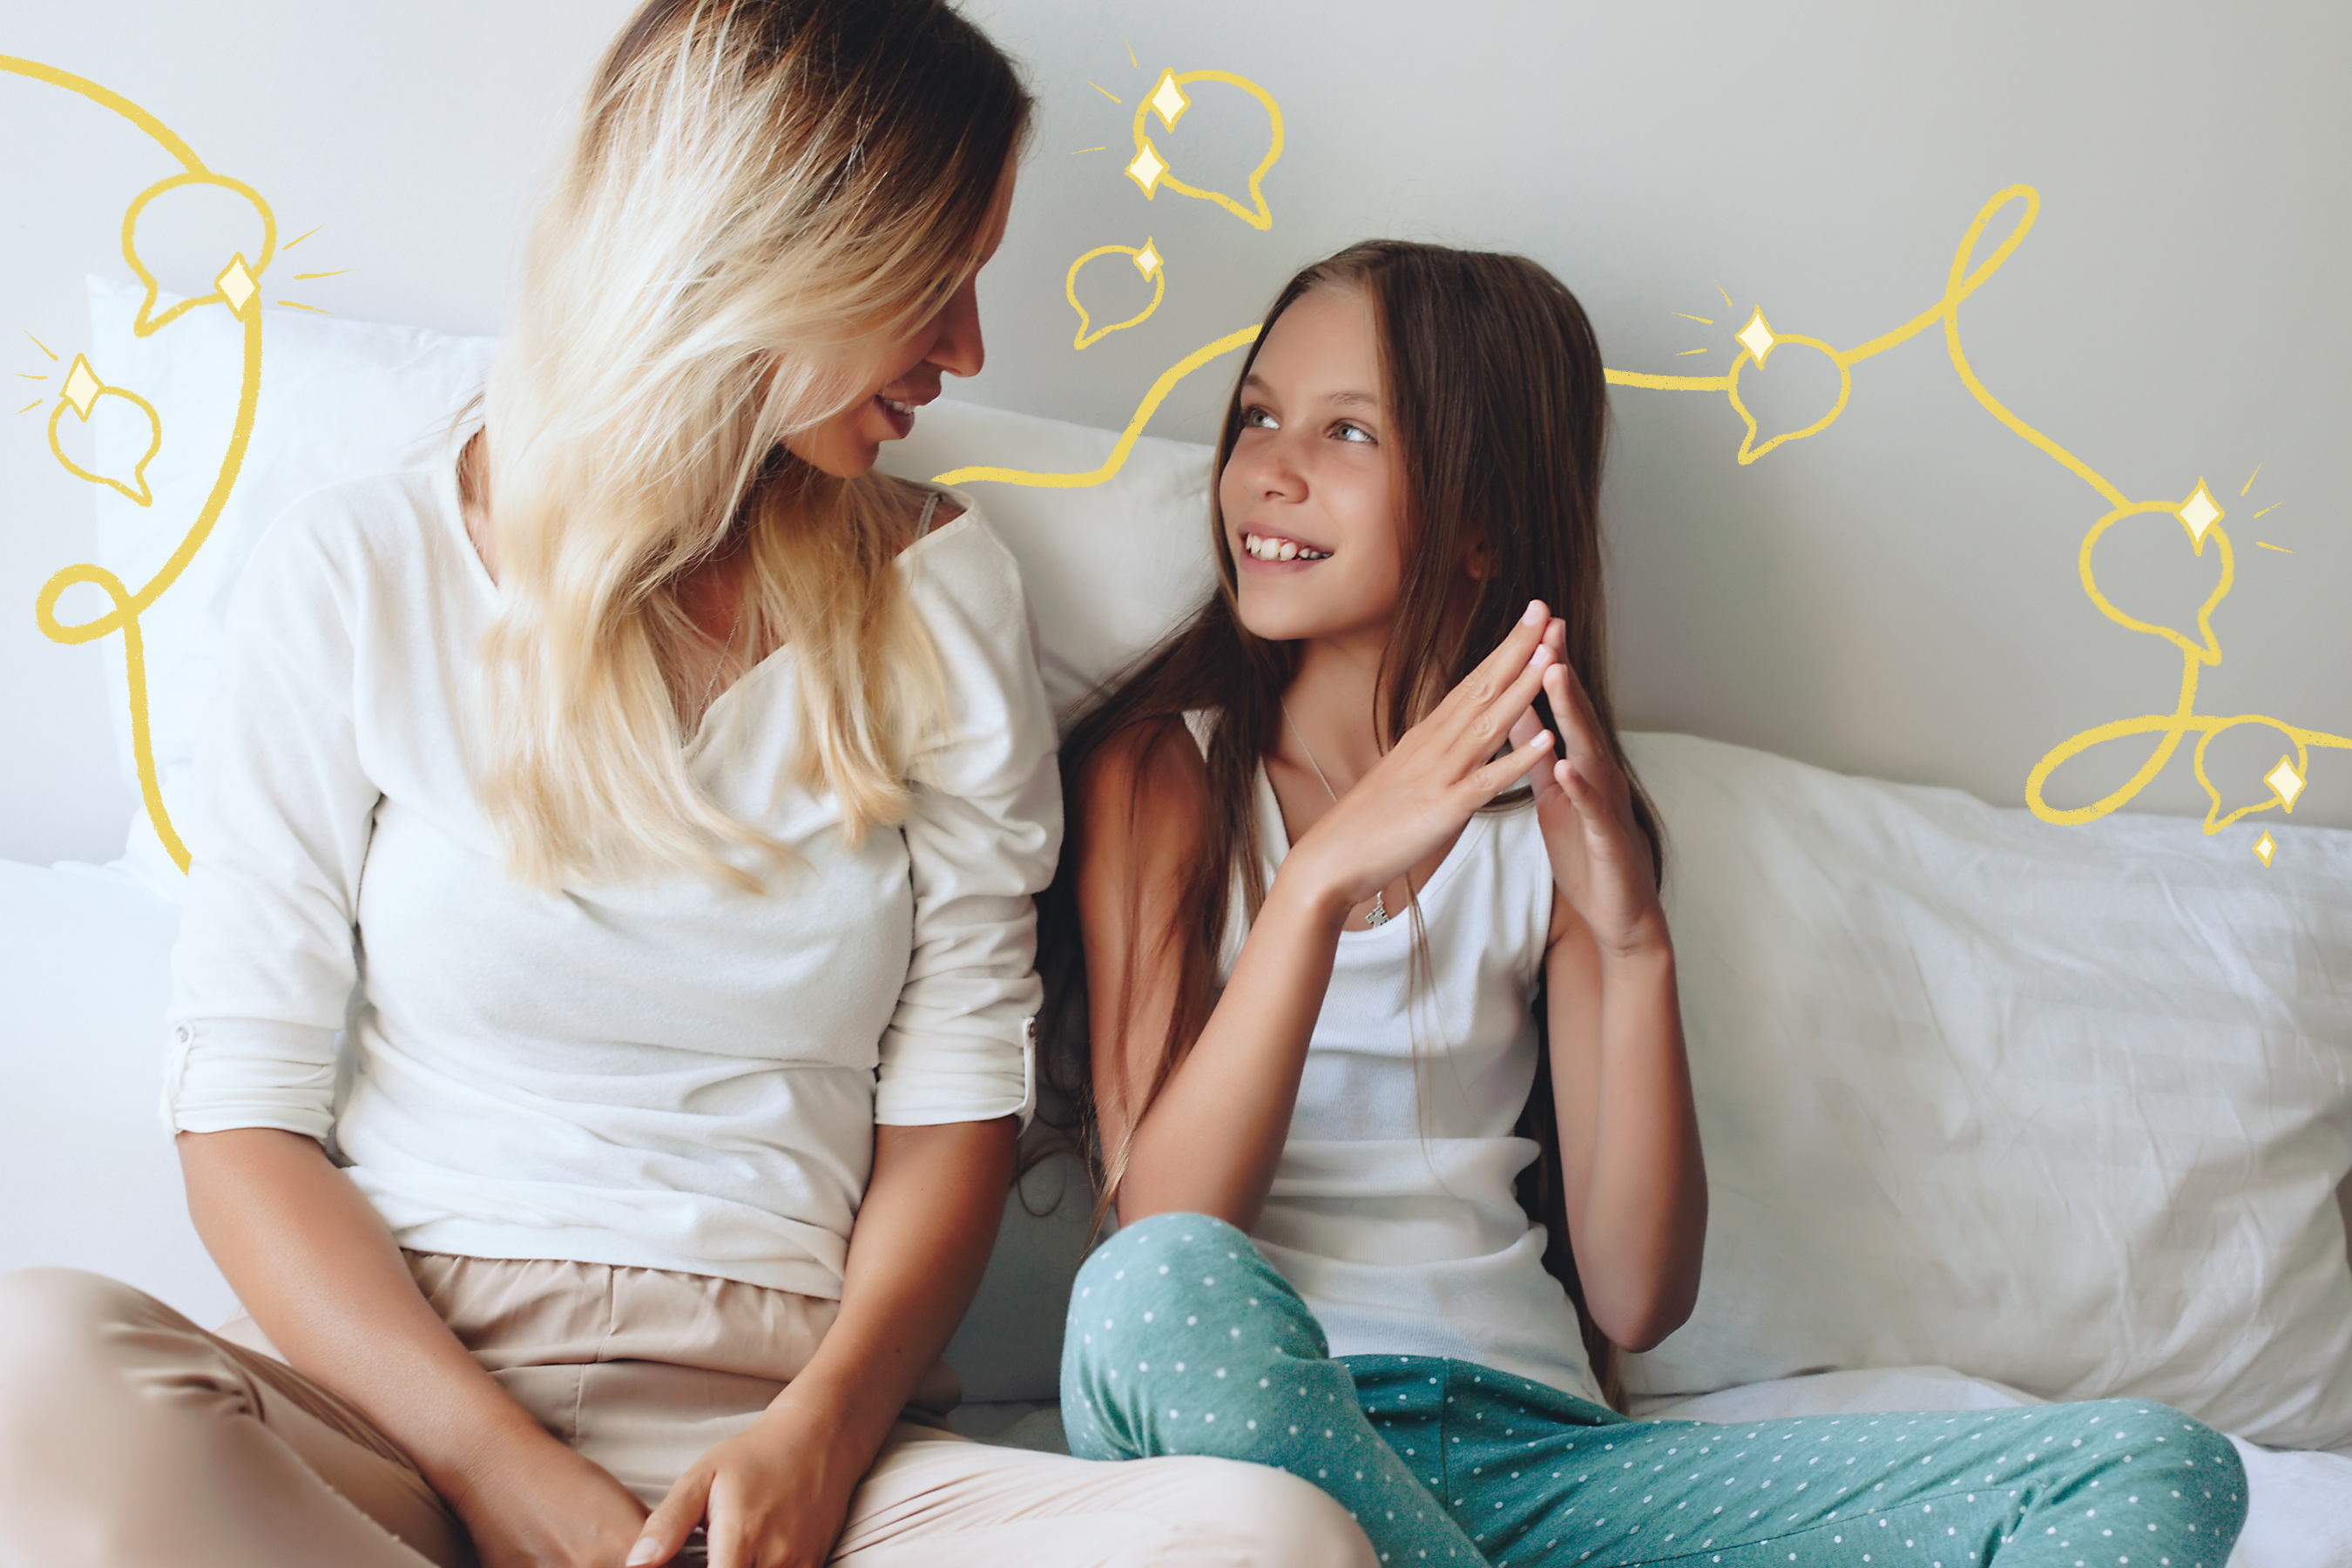 75 Great Conversation Starters for Kids